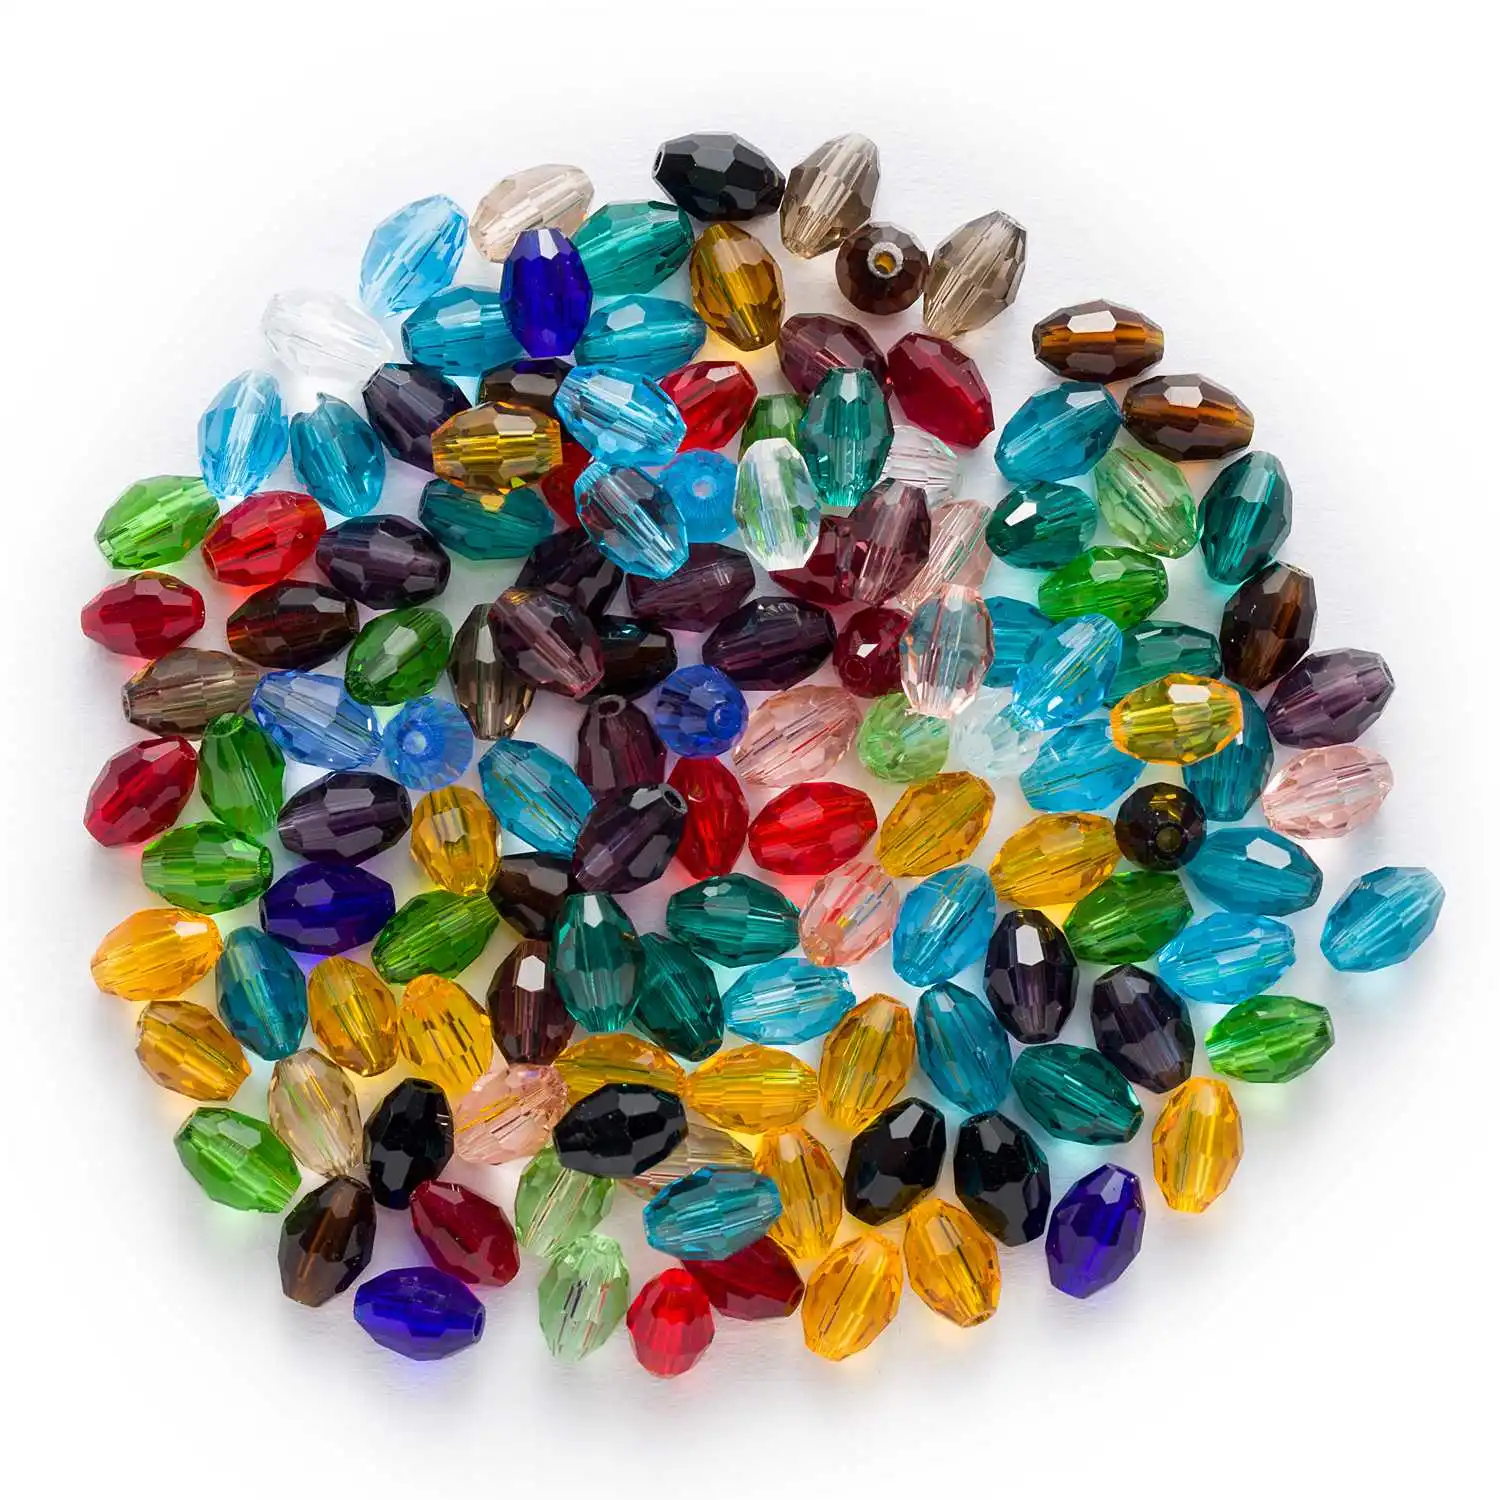 

50pcs Oval Faceted Crystal Glass loose spacer Beads Jewelry Making Sewing DIY Handmade Headwear Bracelet Necklace Finding 6-11mm